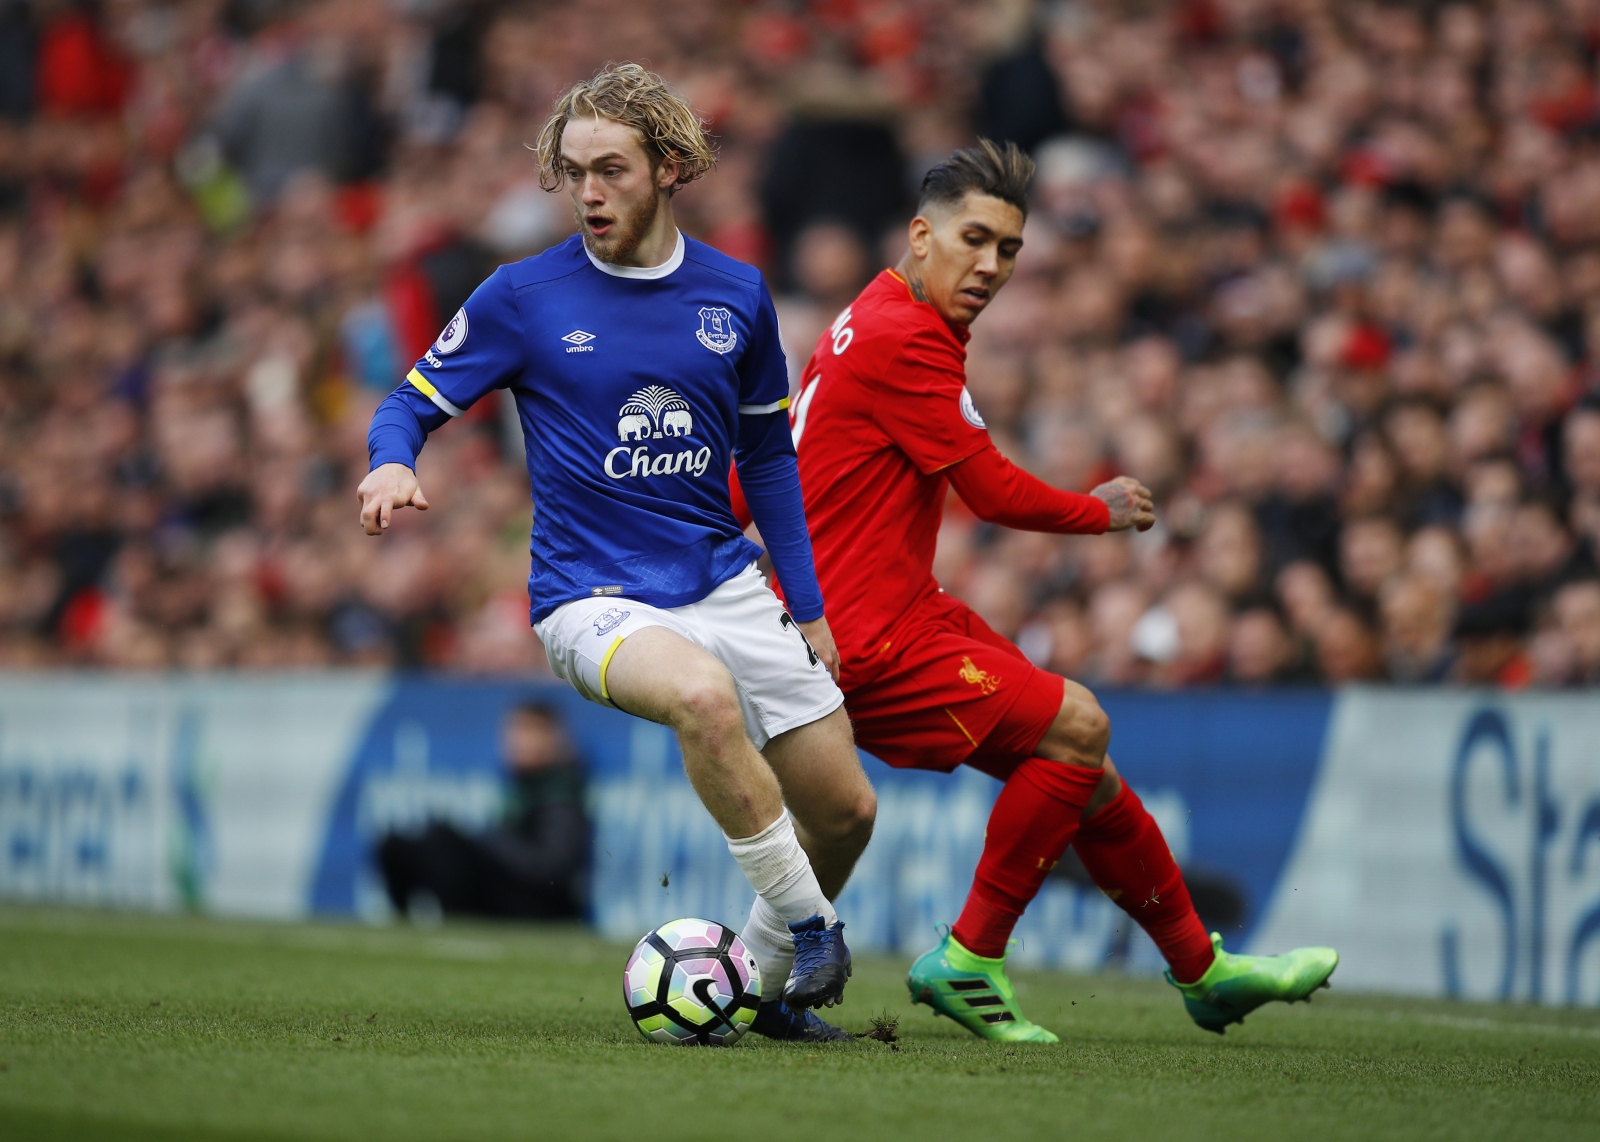 Everton midfielder Tom Davies signs new five-year deal at Goodison Park